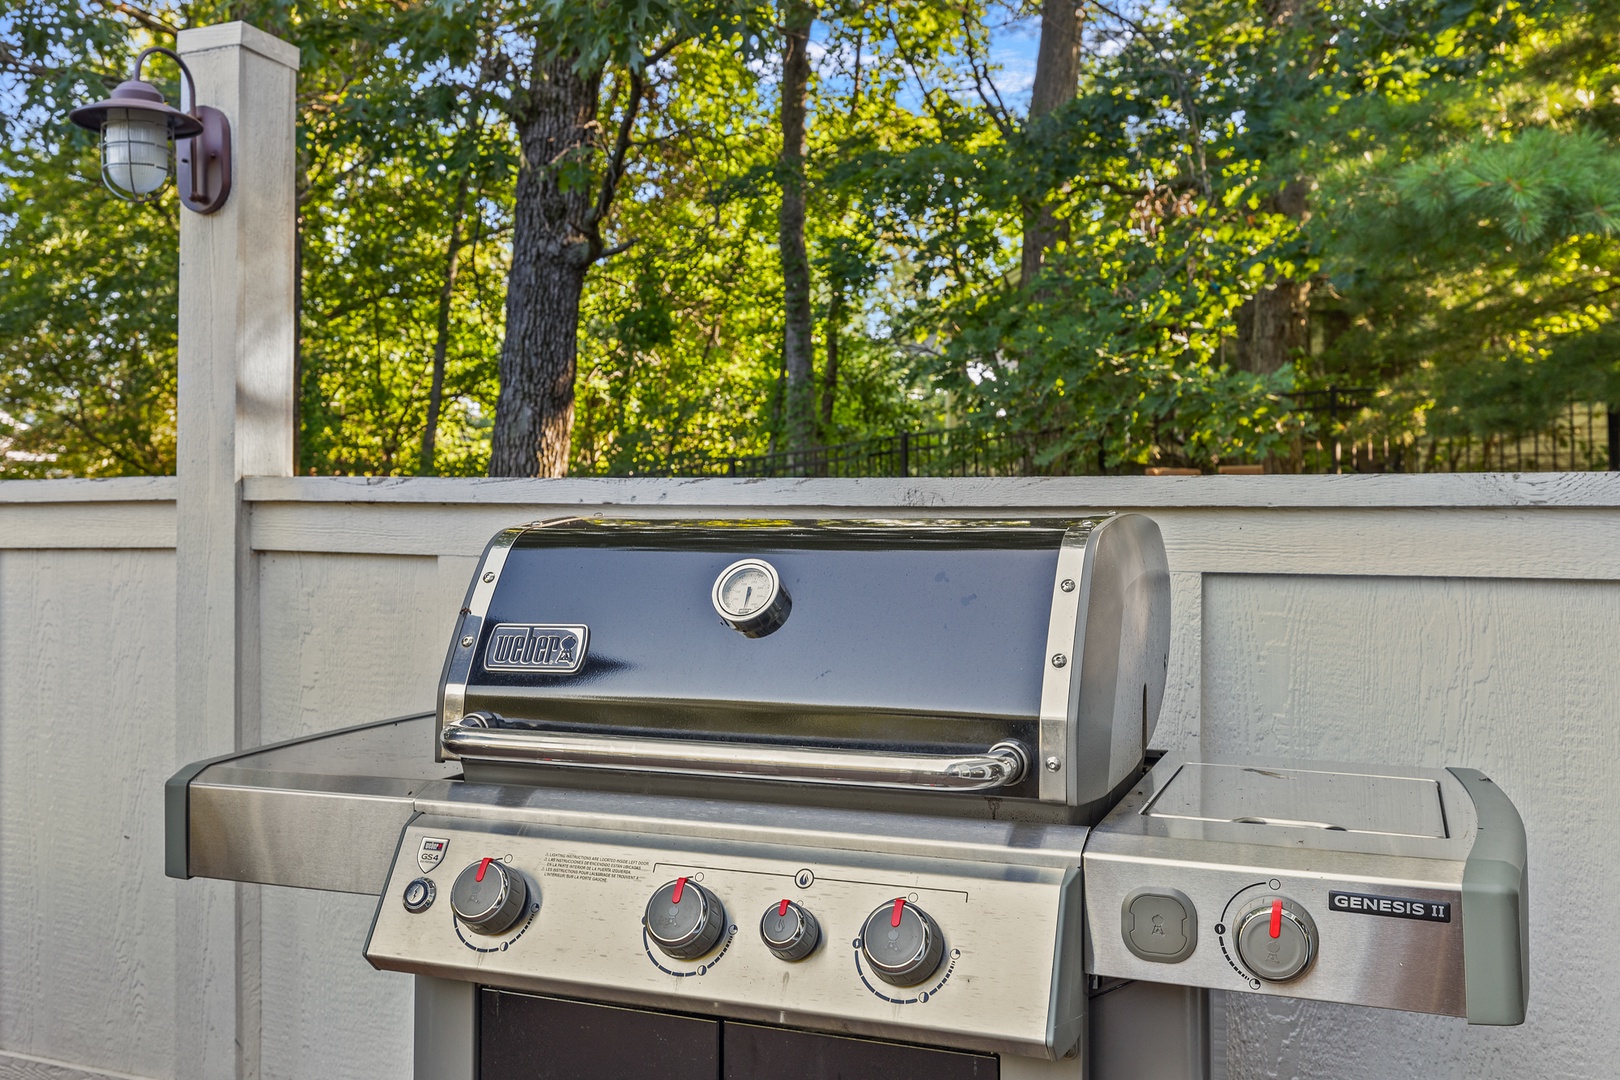 Steaks, hot dogs, or hamburgers - our grill is ready for whatever is on the menu.